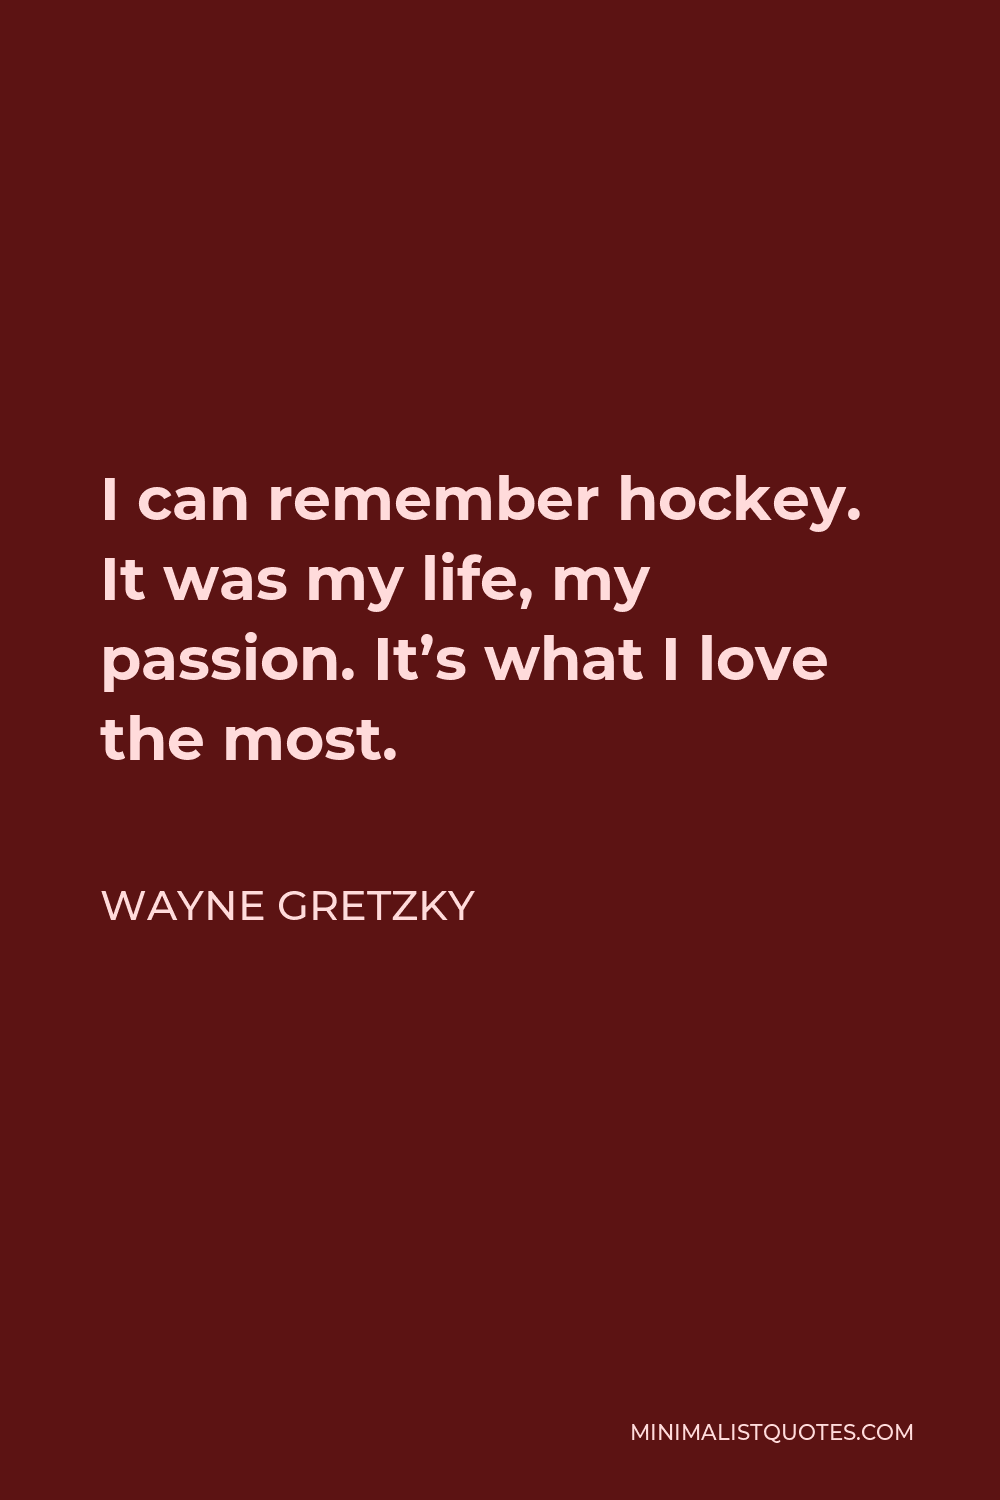 Wayne Gretzky Quote - I can remember hockey. It was my life, my passion. It’s what I love the most.